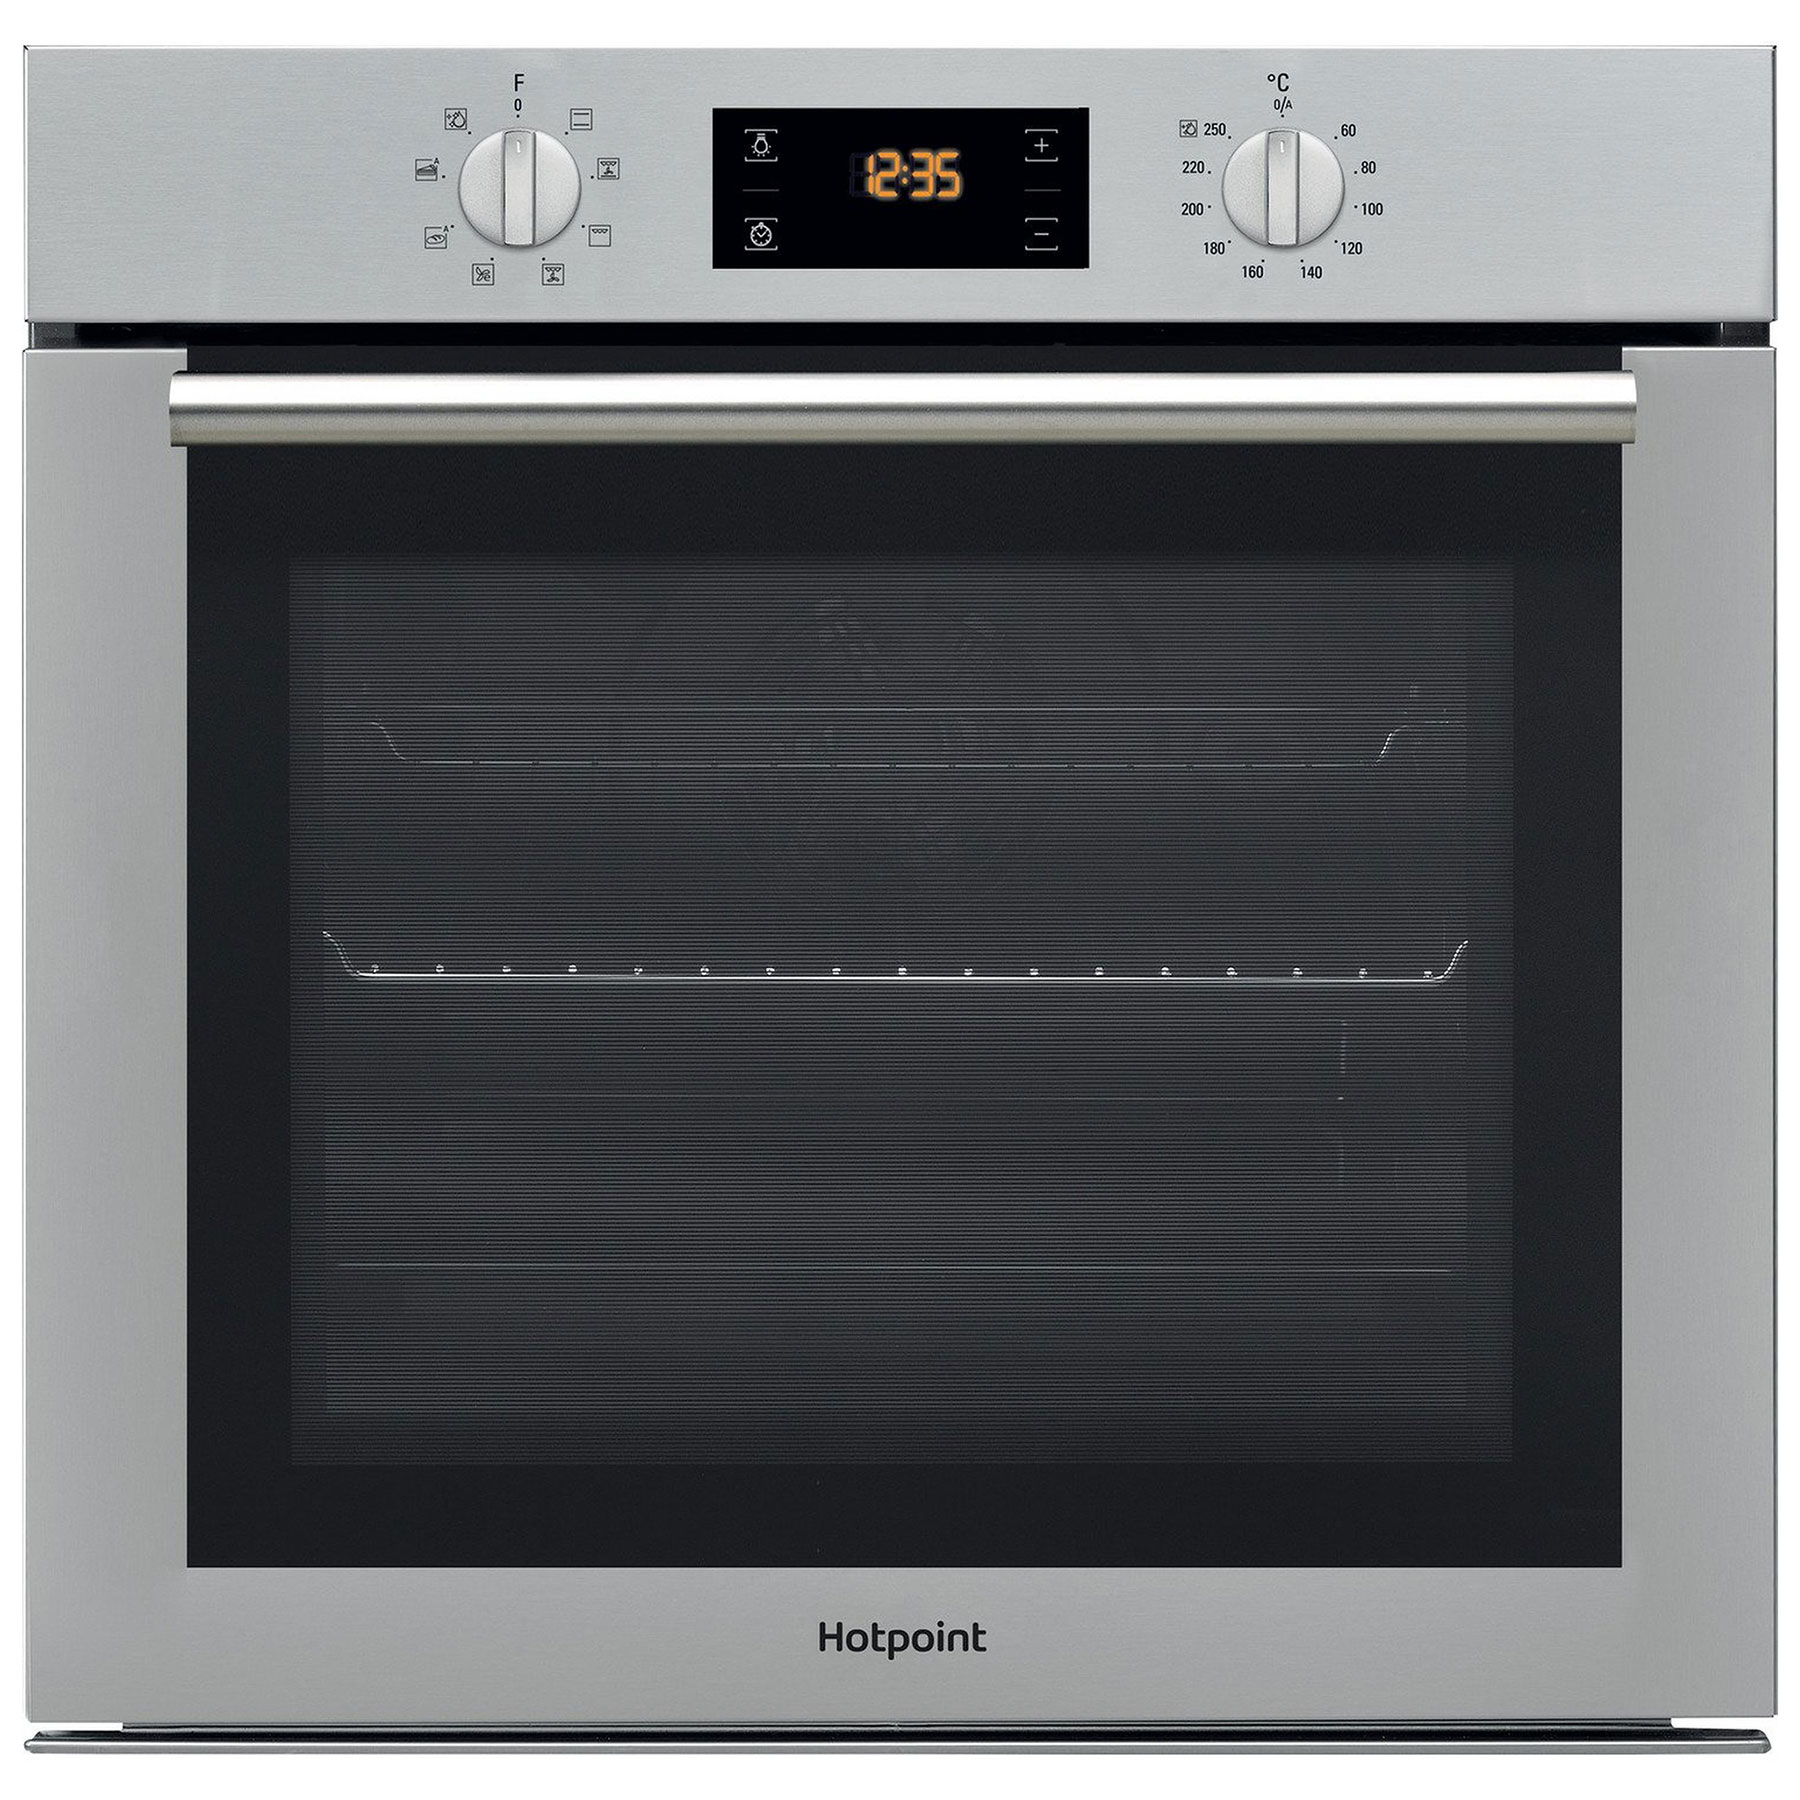 Hotpoint SAEU4544TCIX Built In Electric Single Oven in Inox 71L